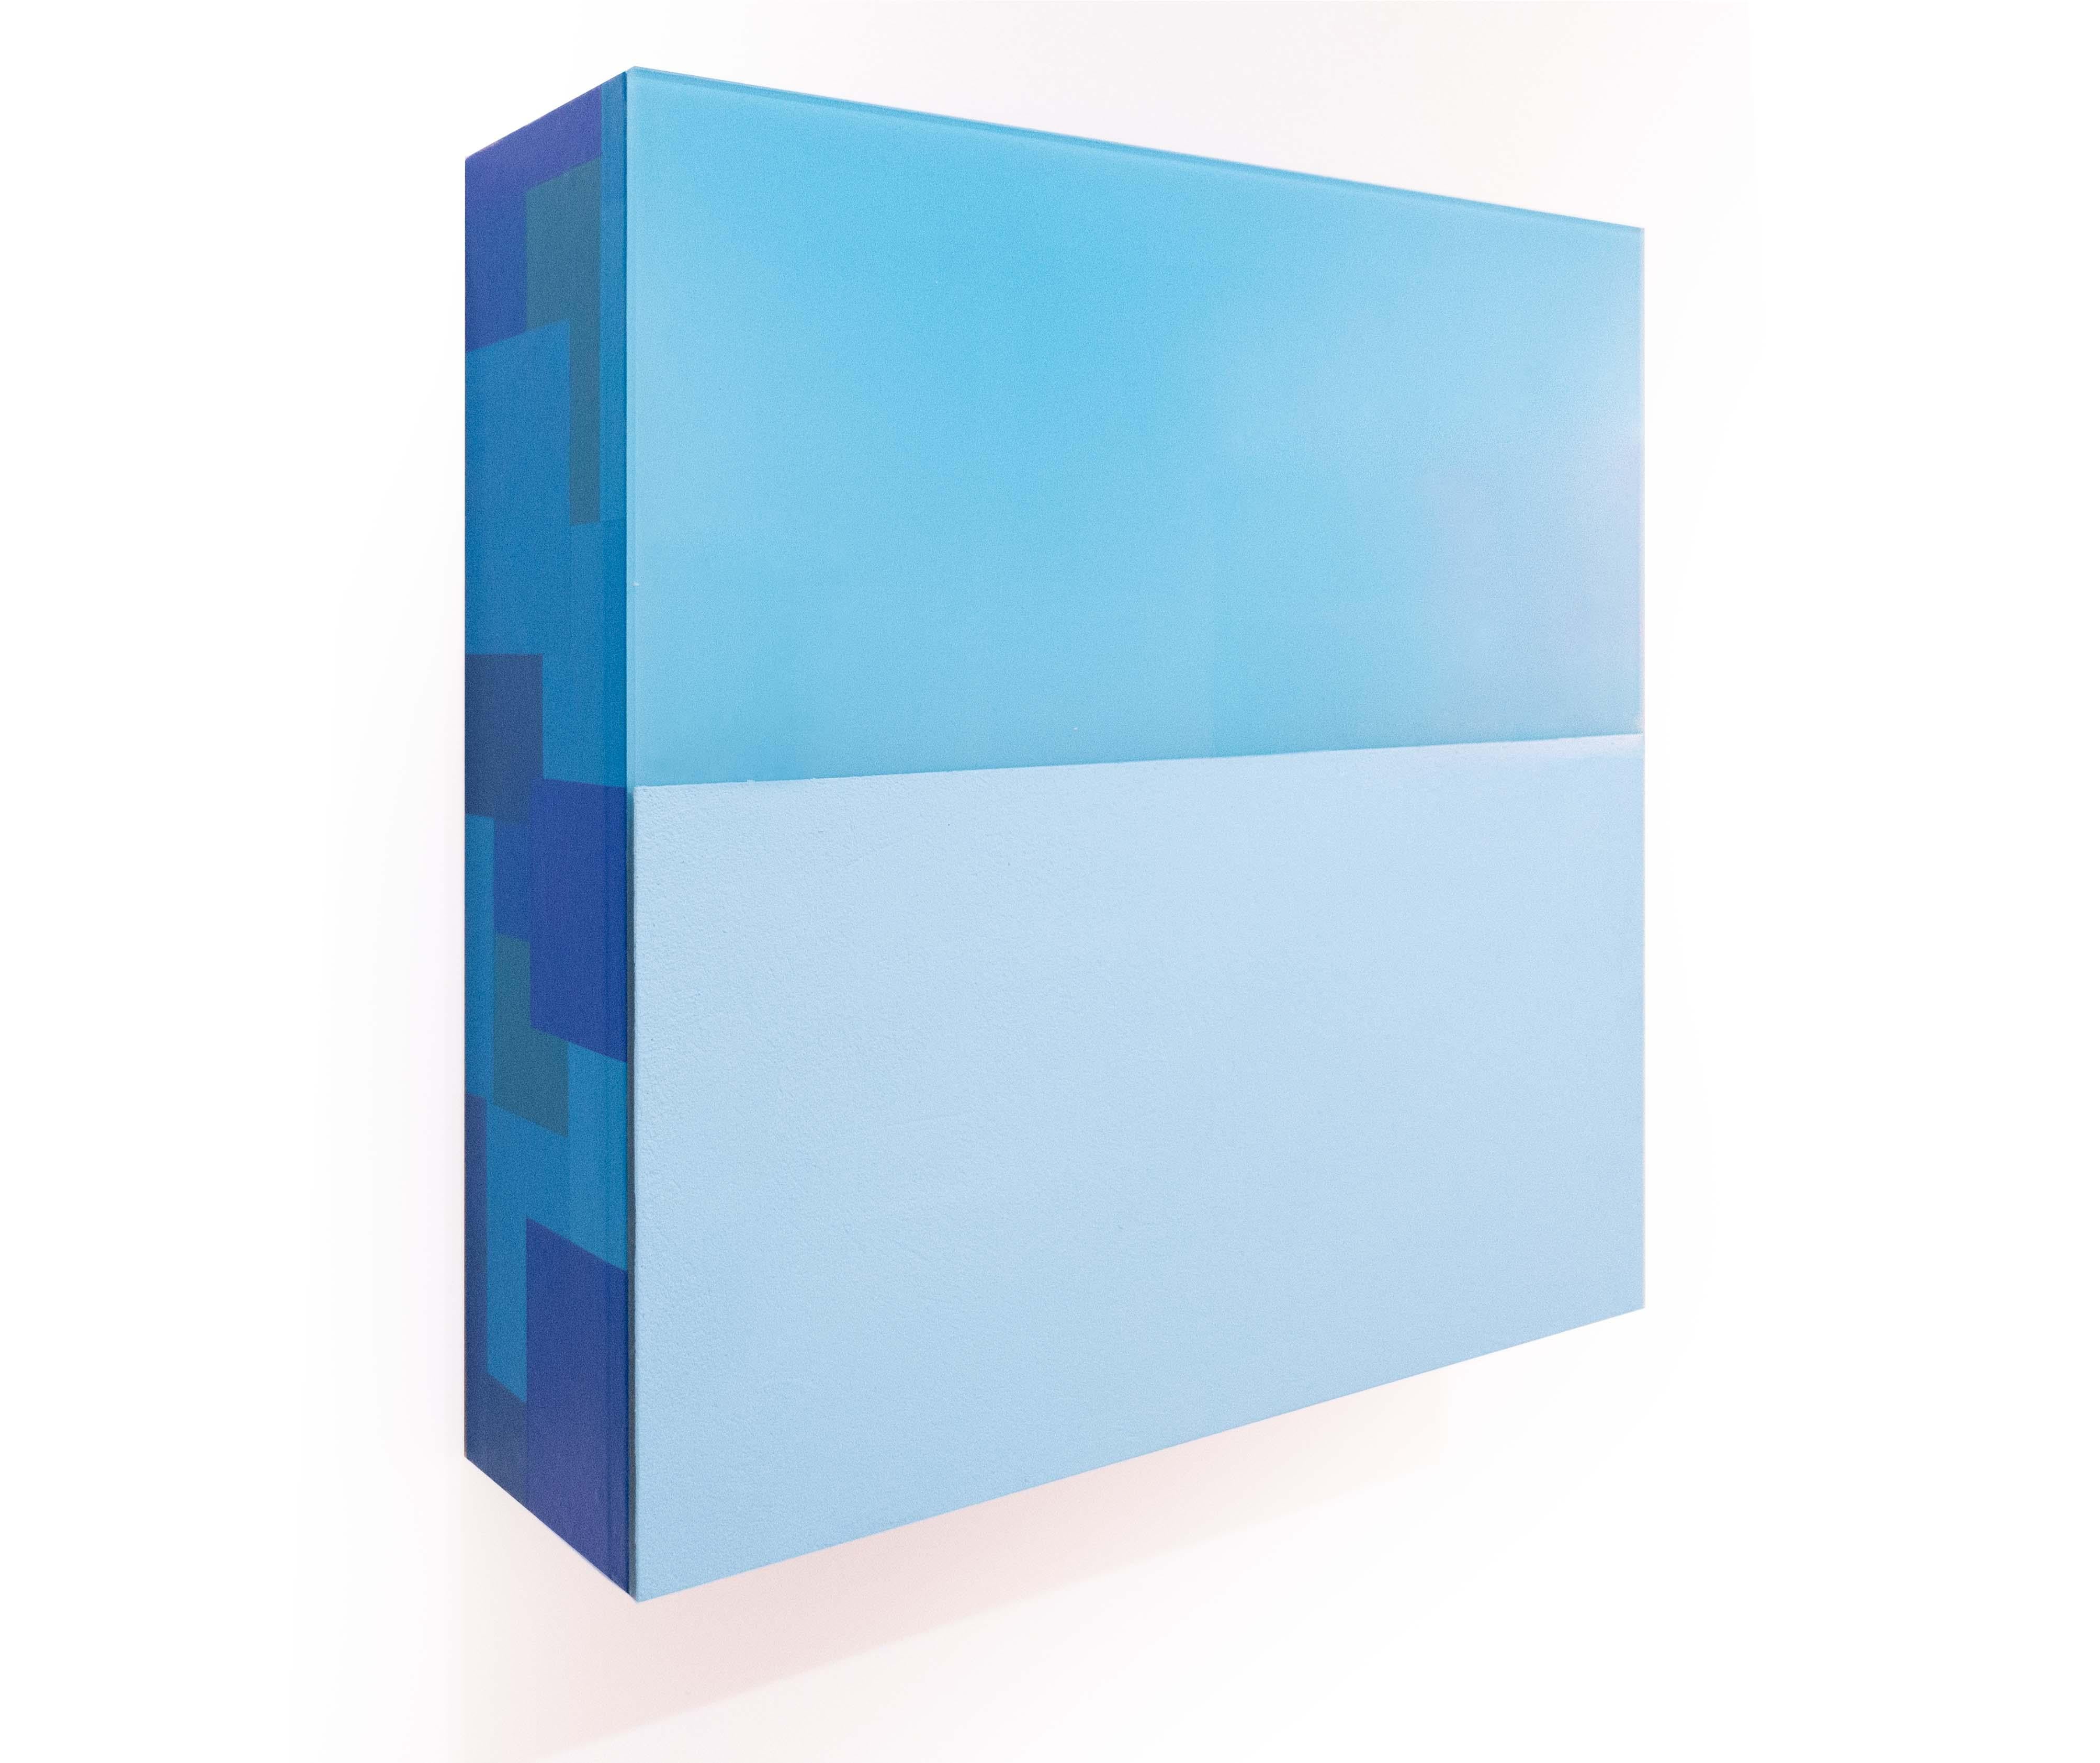 Horizons, 2019, Box, Light Blue, mixed media - Abstract Painting by Marco Casentini